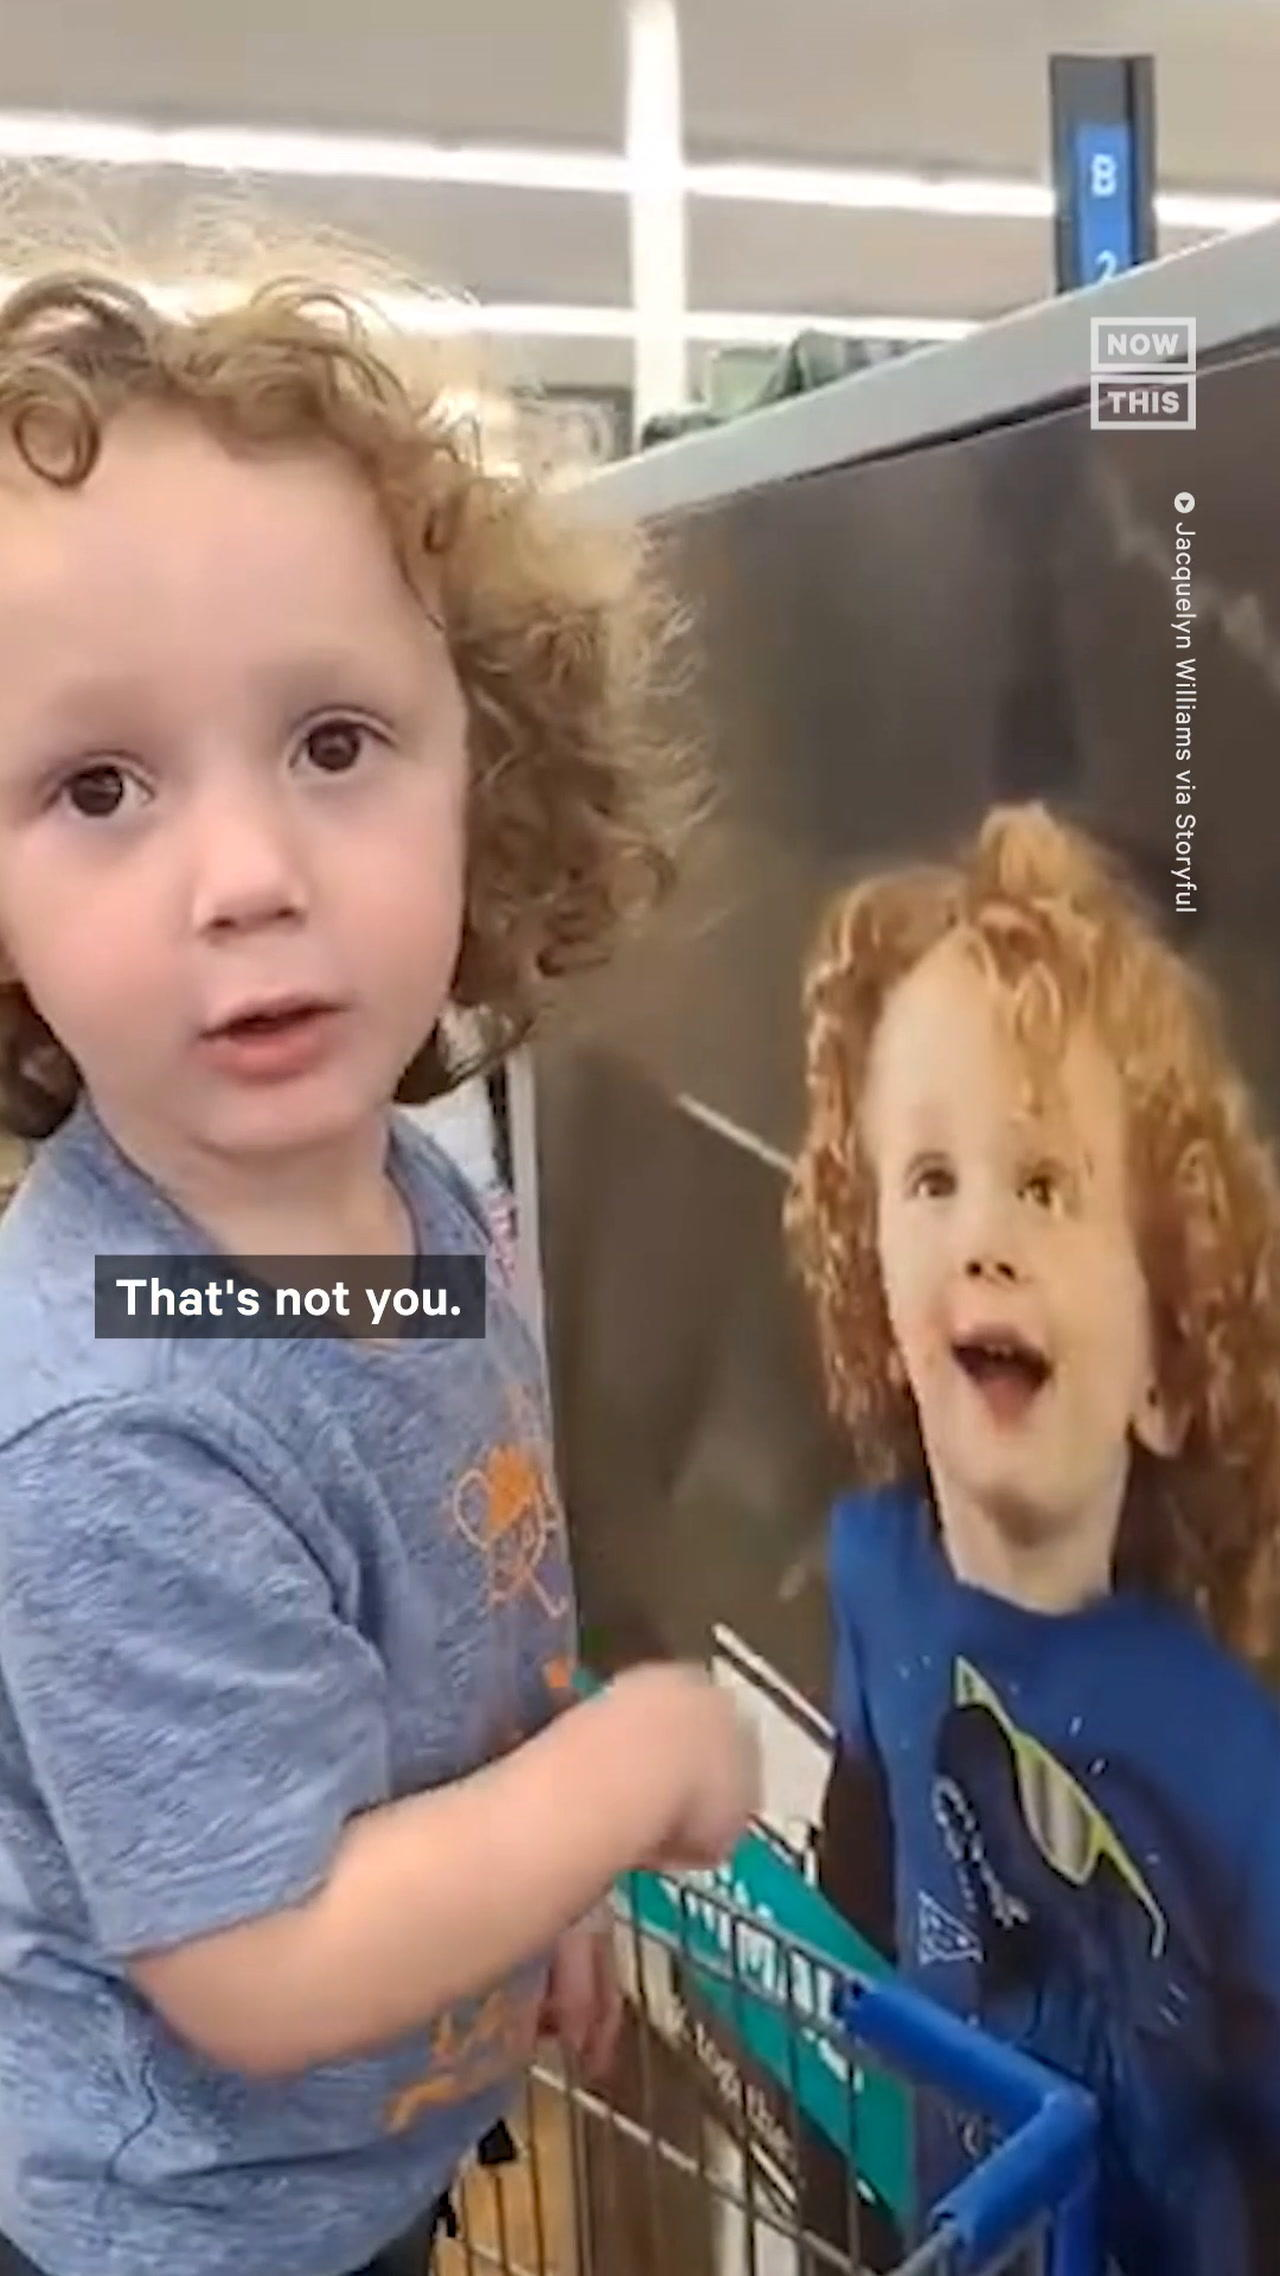 Toddler Mistakes Kid in Walmart Shopping Ad for Himself